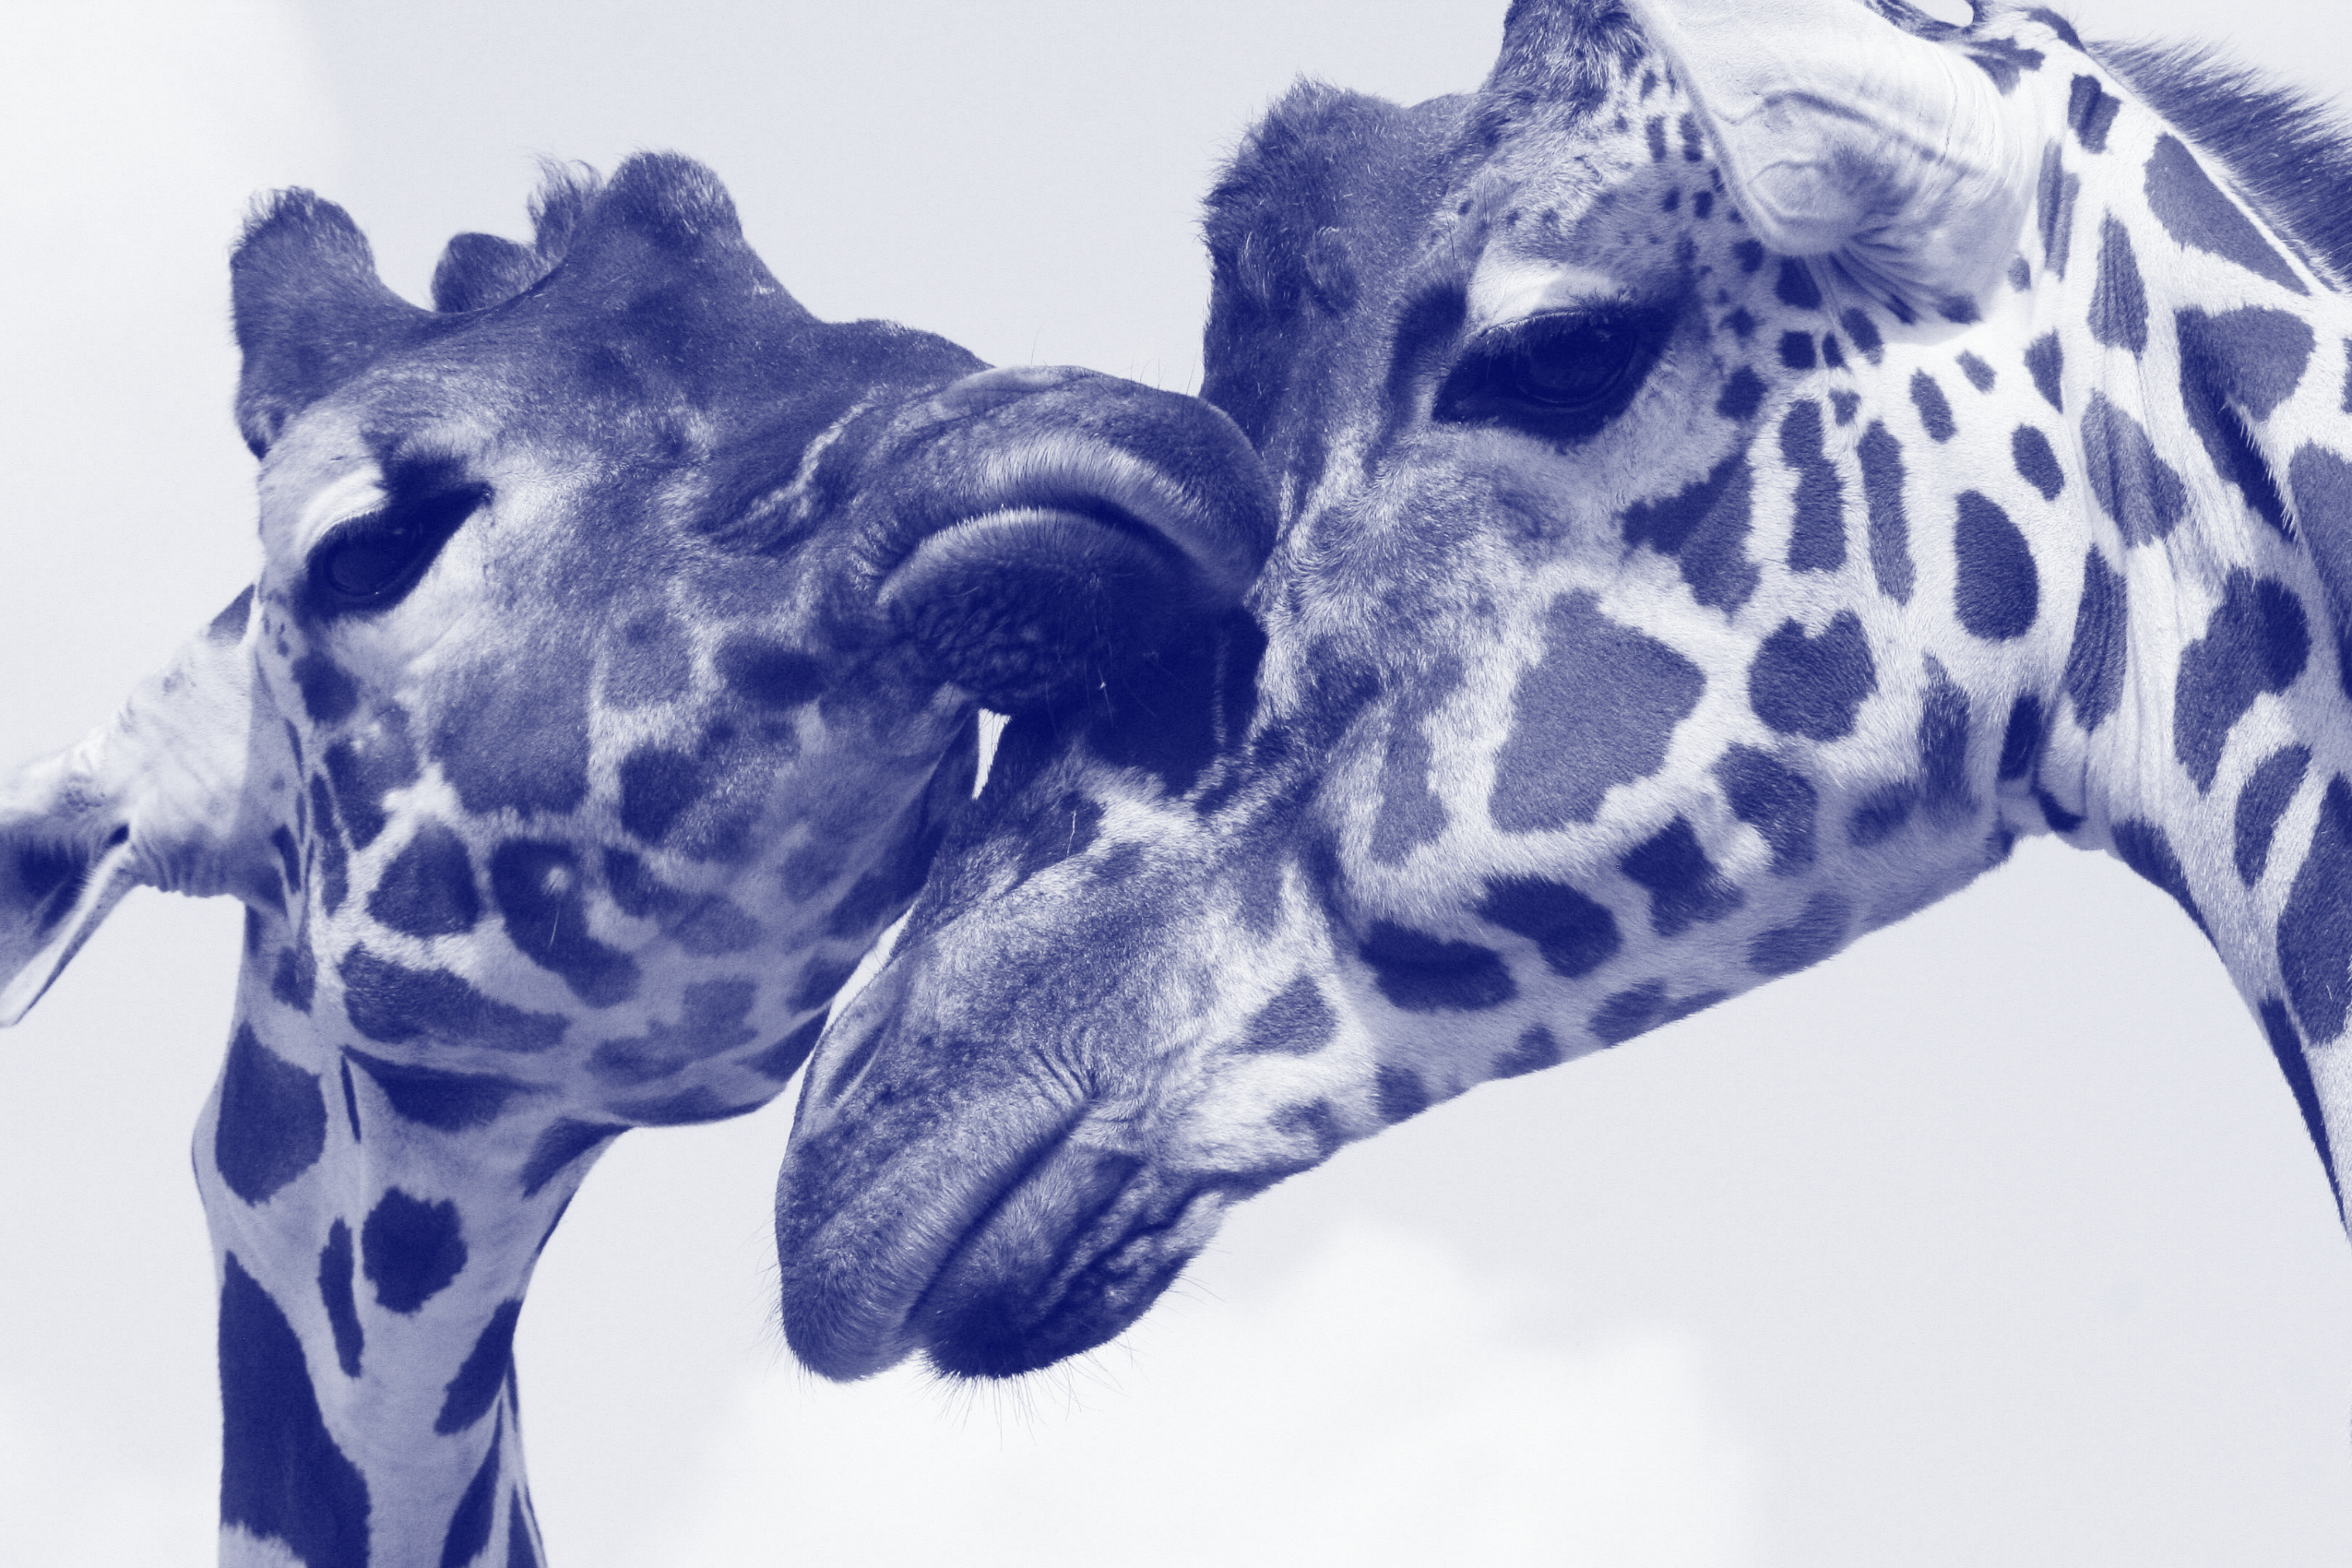 A mother and baby giraffe nuzzle each other